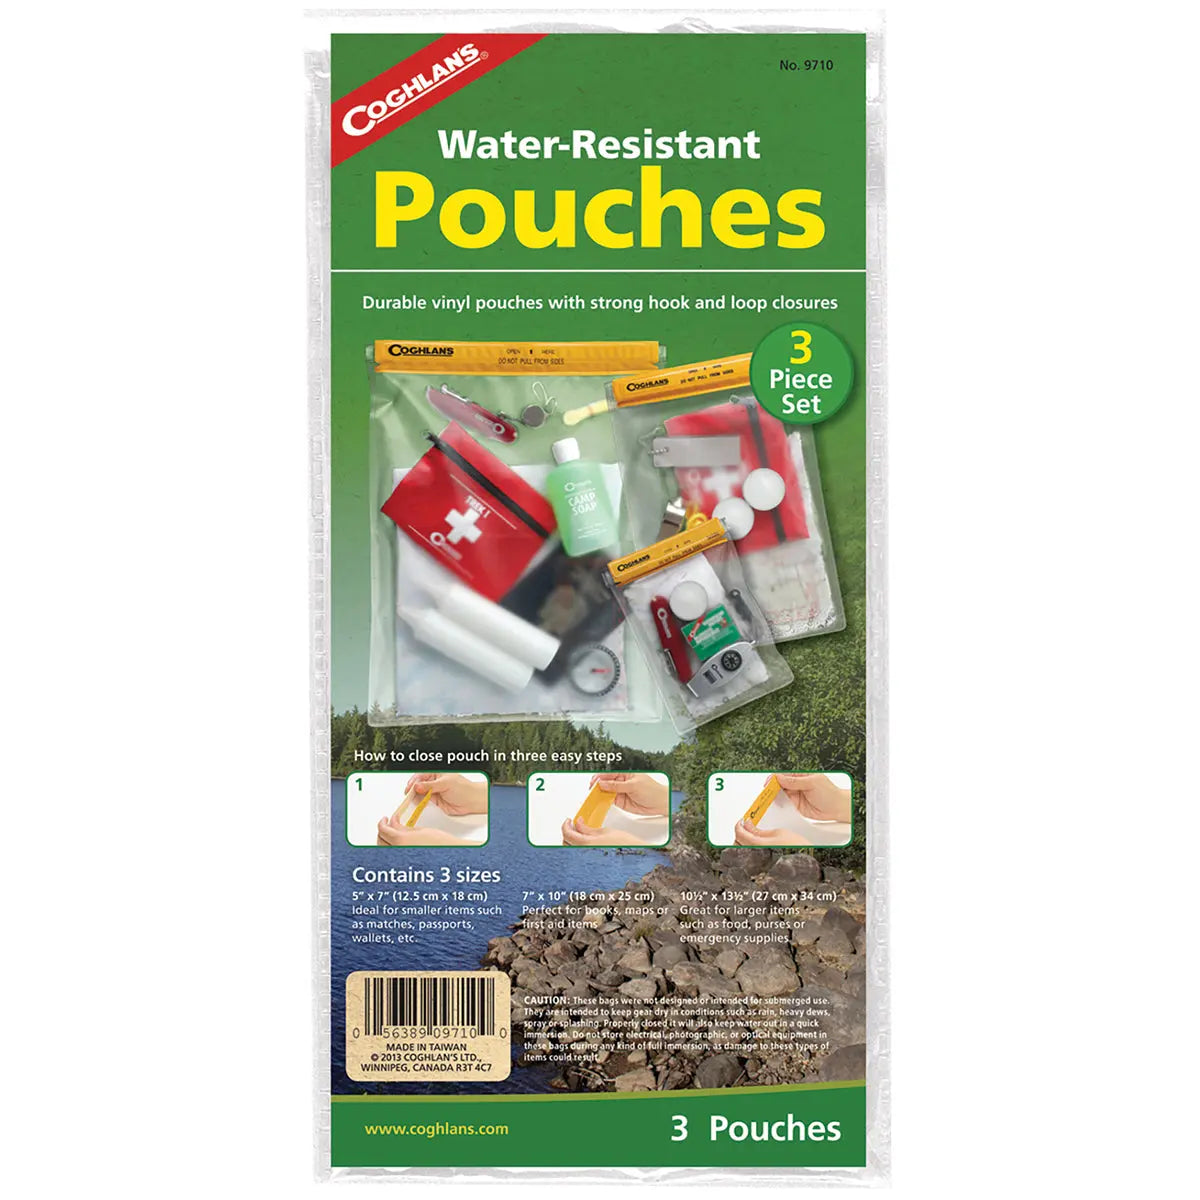 Coghlan's Water-Resistant Pouches (3 Piece Set), Travel Camping Emergency Bags Coghlan's